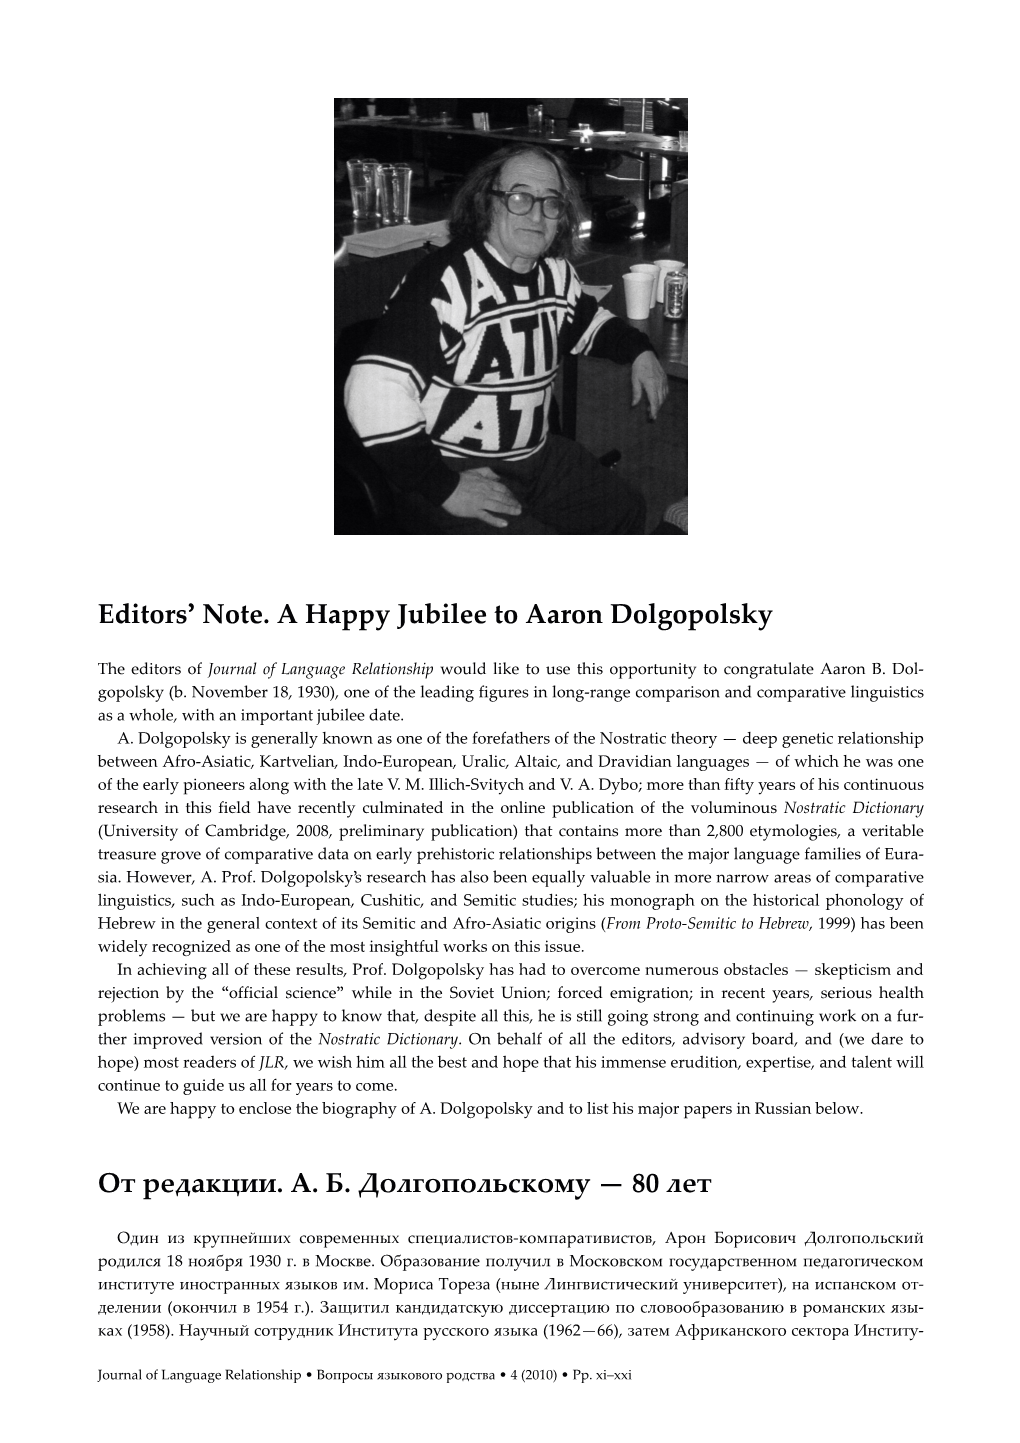 Editors' Note. a Happy Jubilee to Aaron Dolgopolsky От Редакции. А